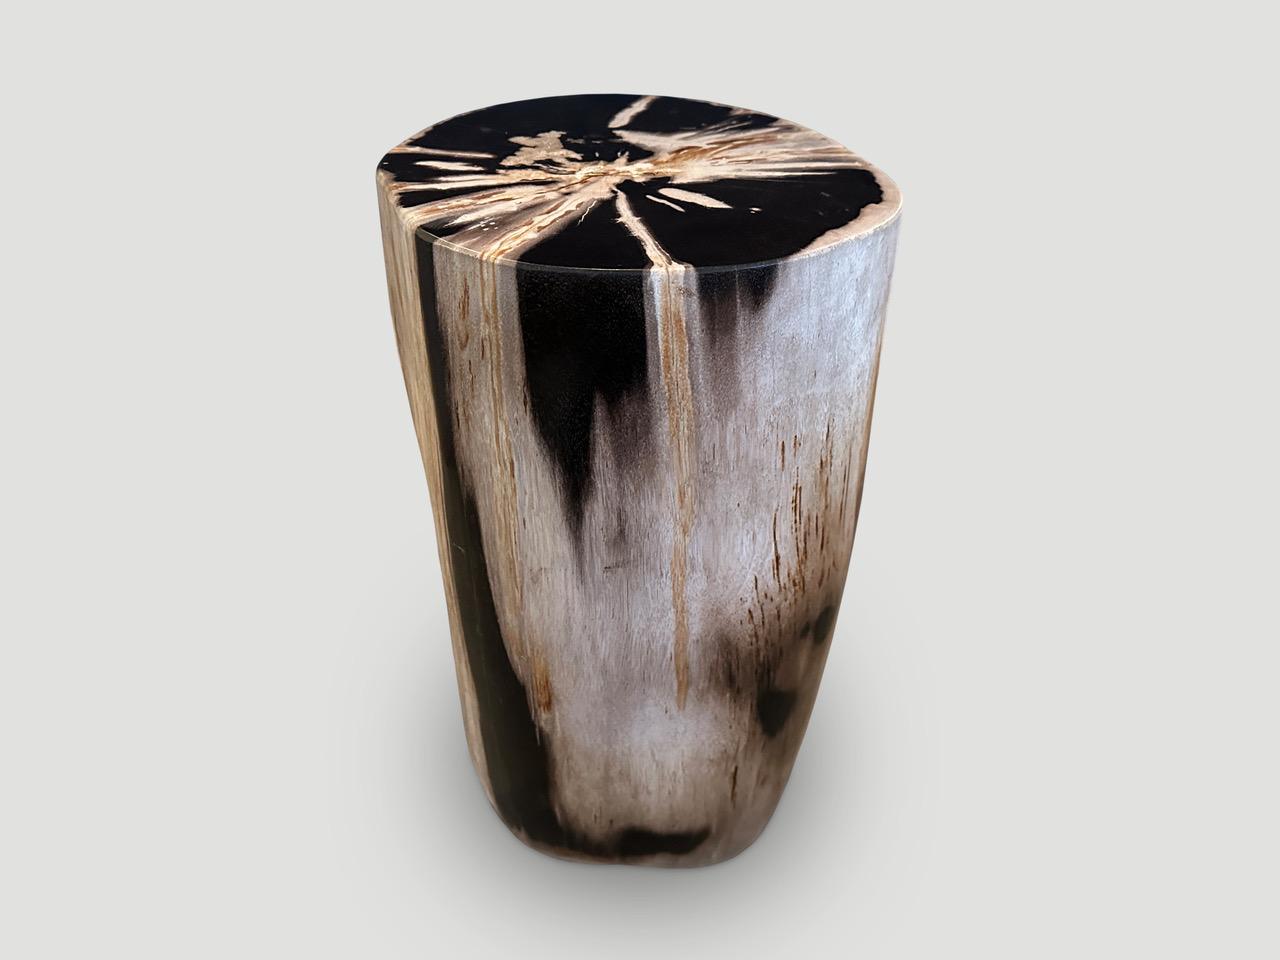 Beautiful contrasting tones on this high quality super smooth petrified wood side table. It’s fascinating how Mother Nature produces these stunning 40 million year old petrified teak logs with such contrasting colors and natural patterns throughout.